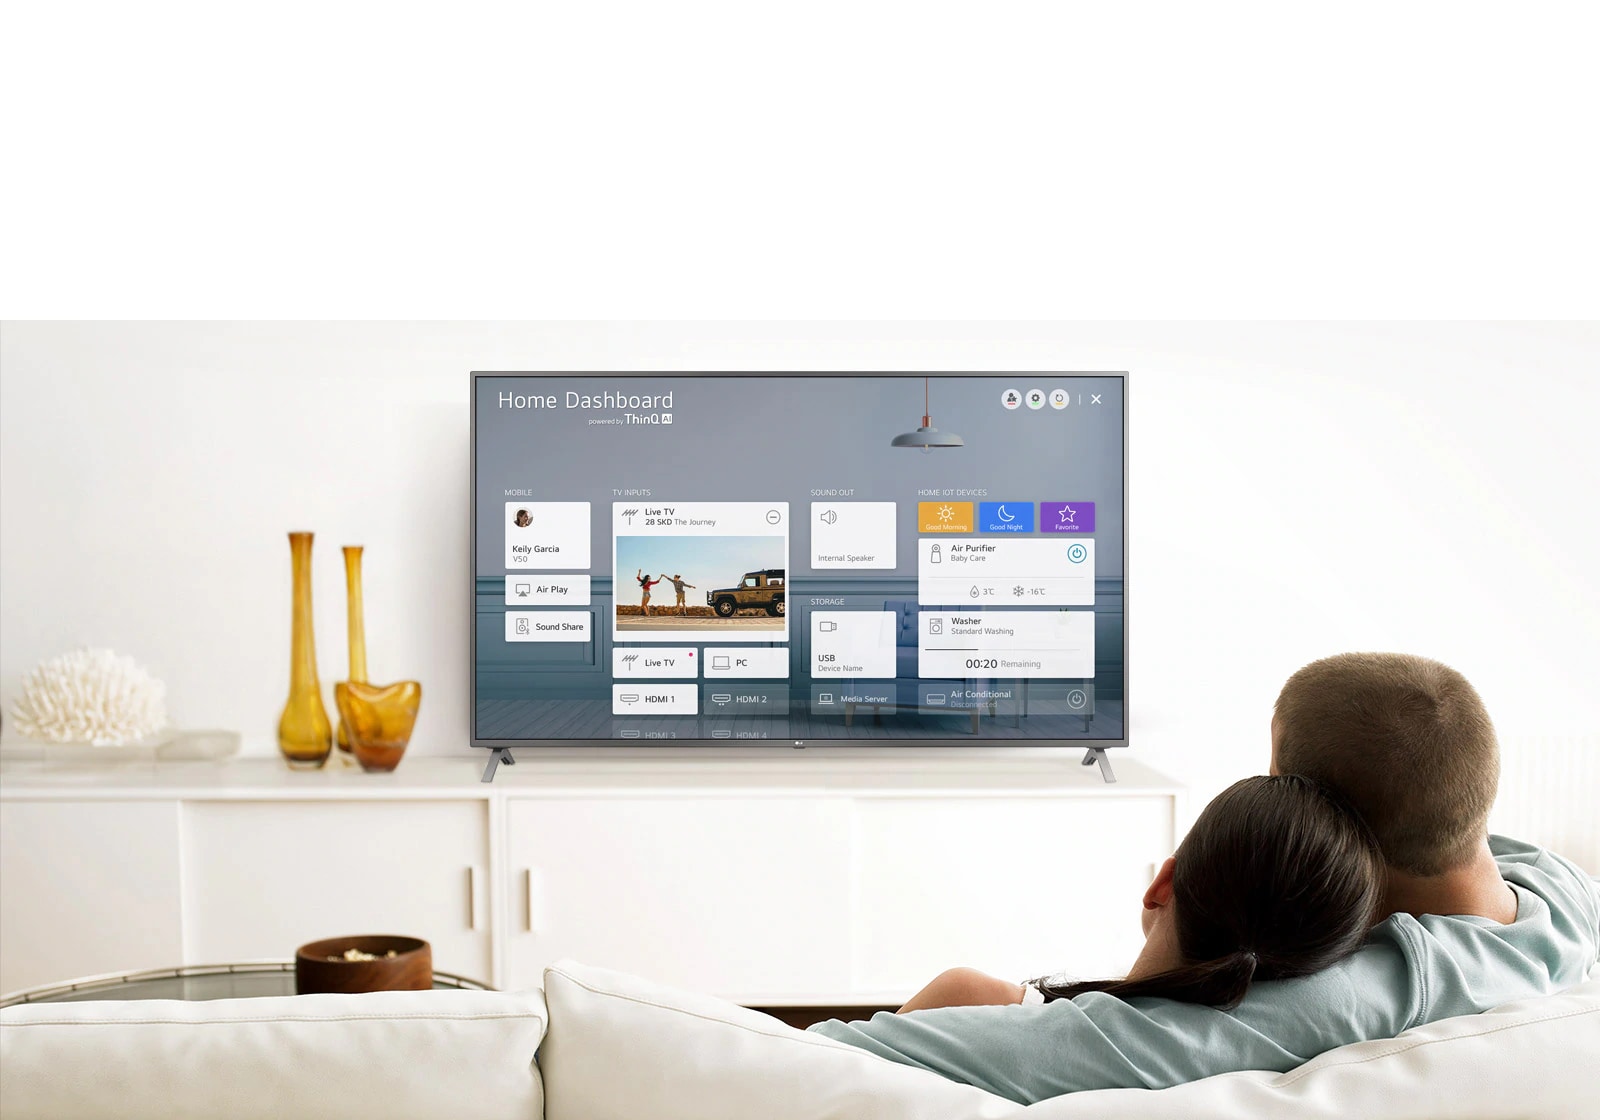 A men and women sitting on a sofa in the living room with the Home Dashboard on the TV screen.